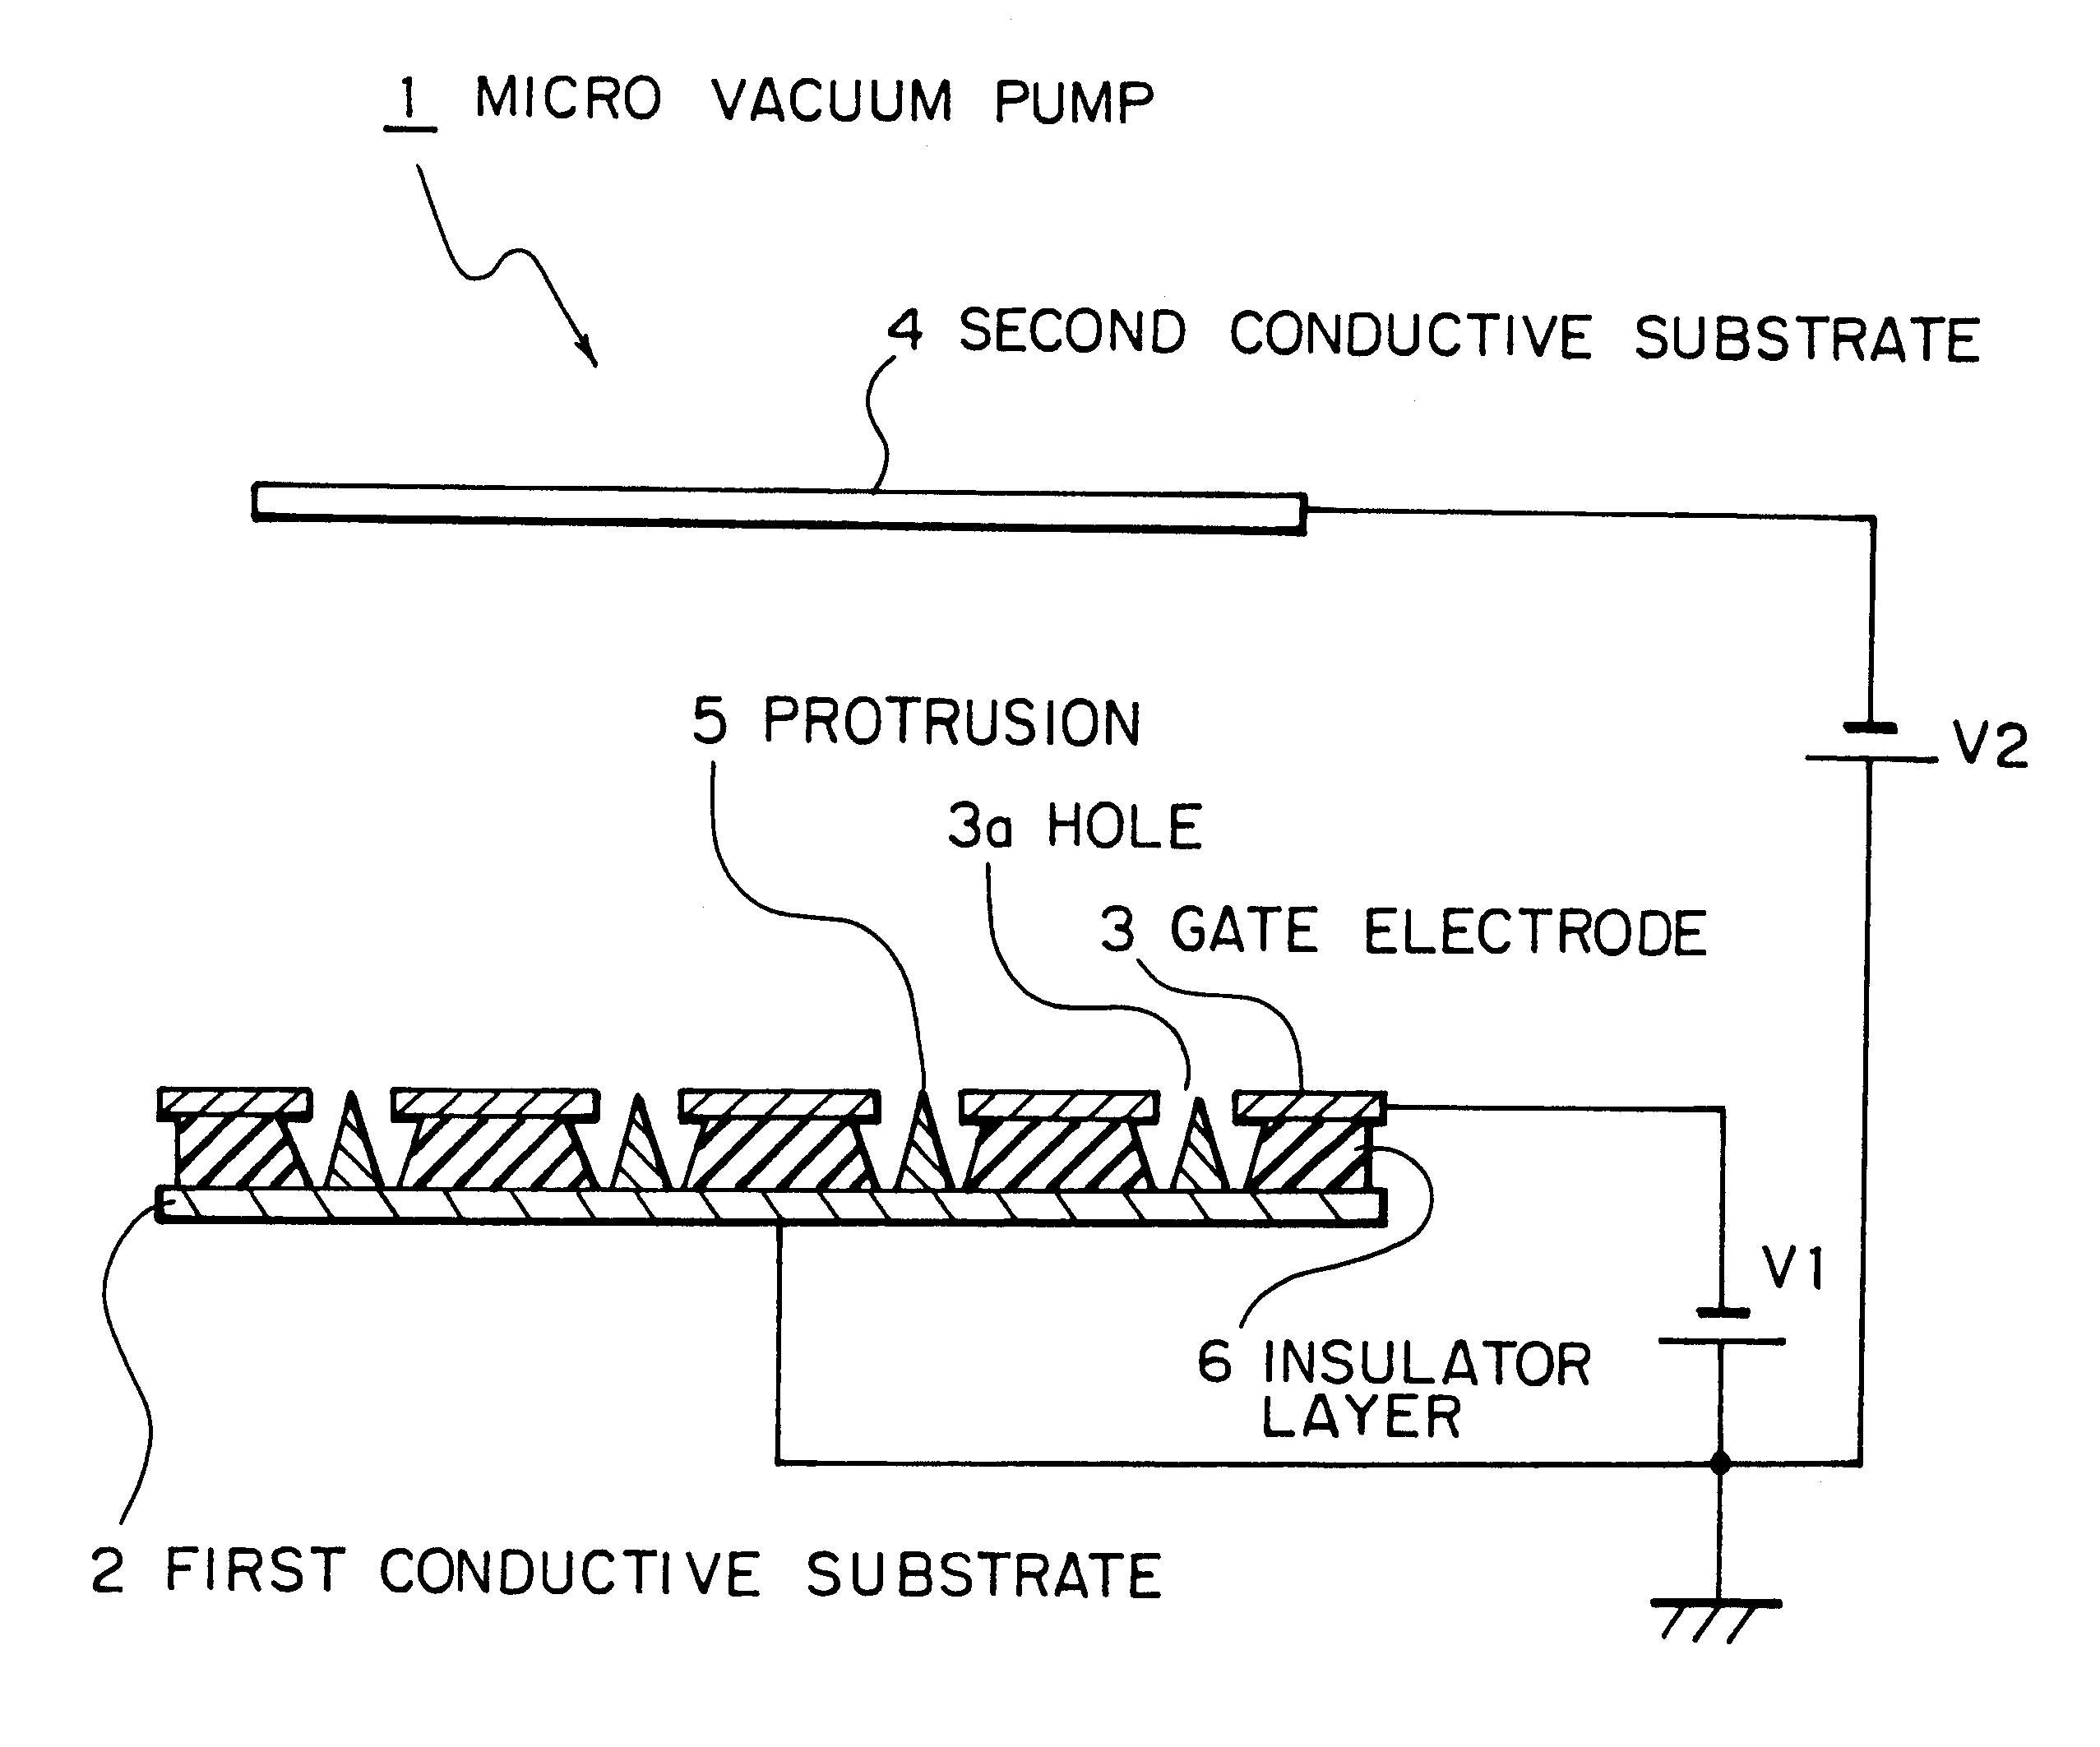 Micro vacuum pump for maintaining high degree of vacuum and apparatus including the same